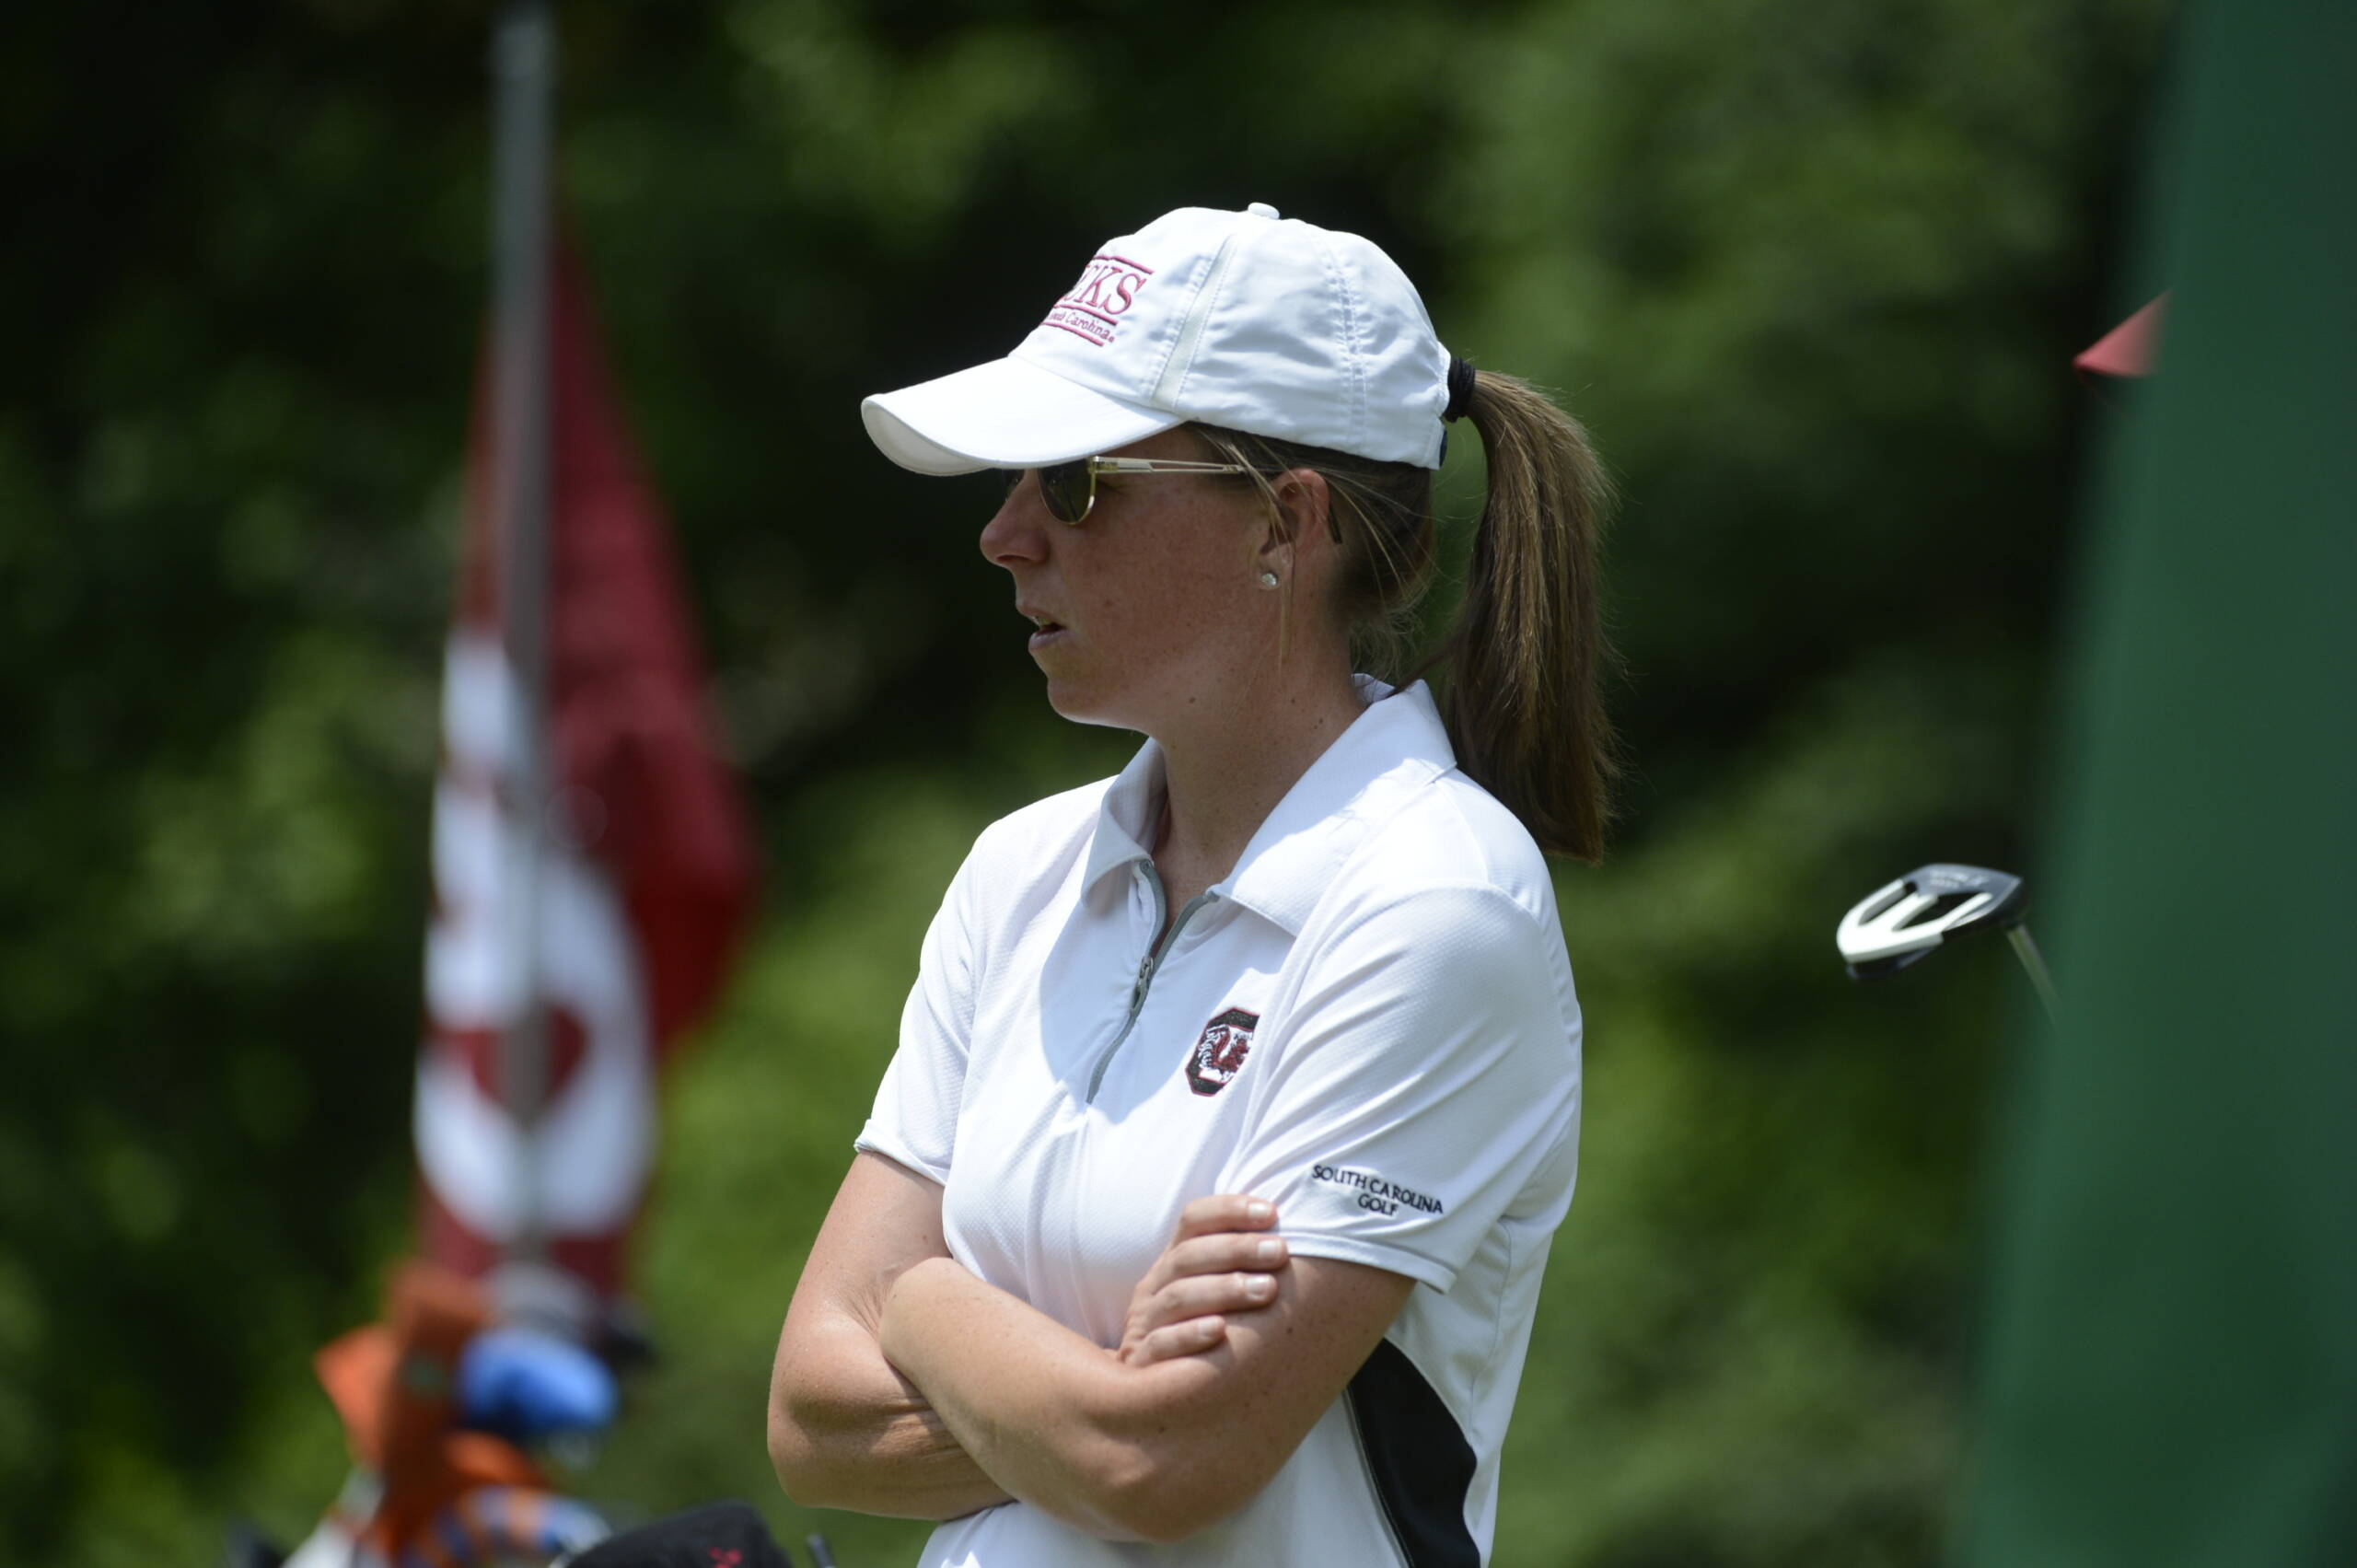 Gamecocks Climb to 16th After Third Round of NCAA Championship